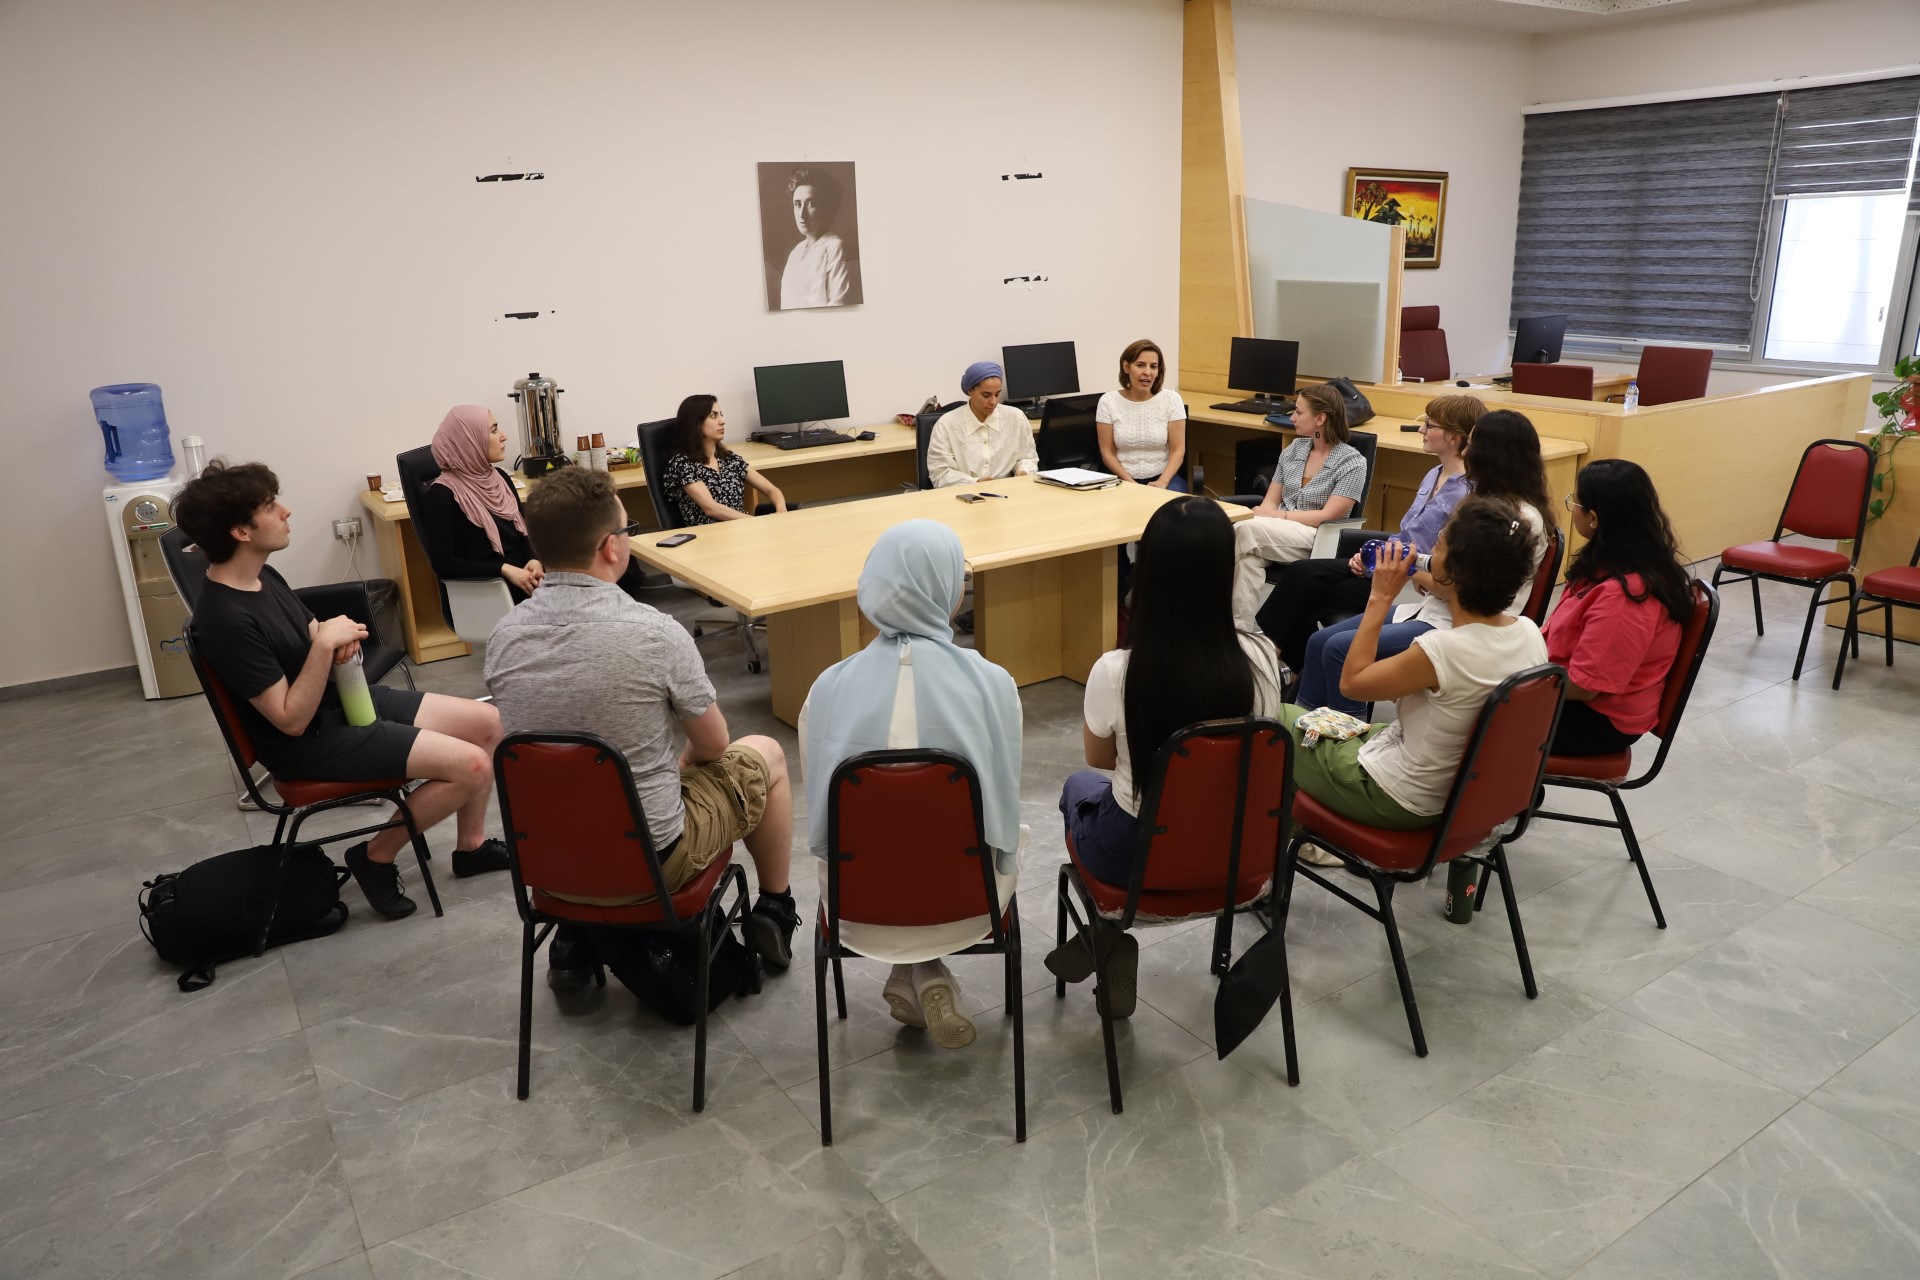 The AAUP Policy and Conflict Resolution Studies Center Announces the Launch of the First Group of the International Summer School Program